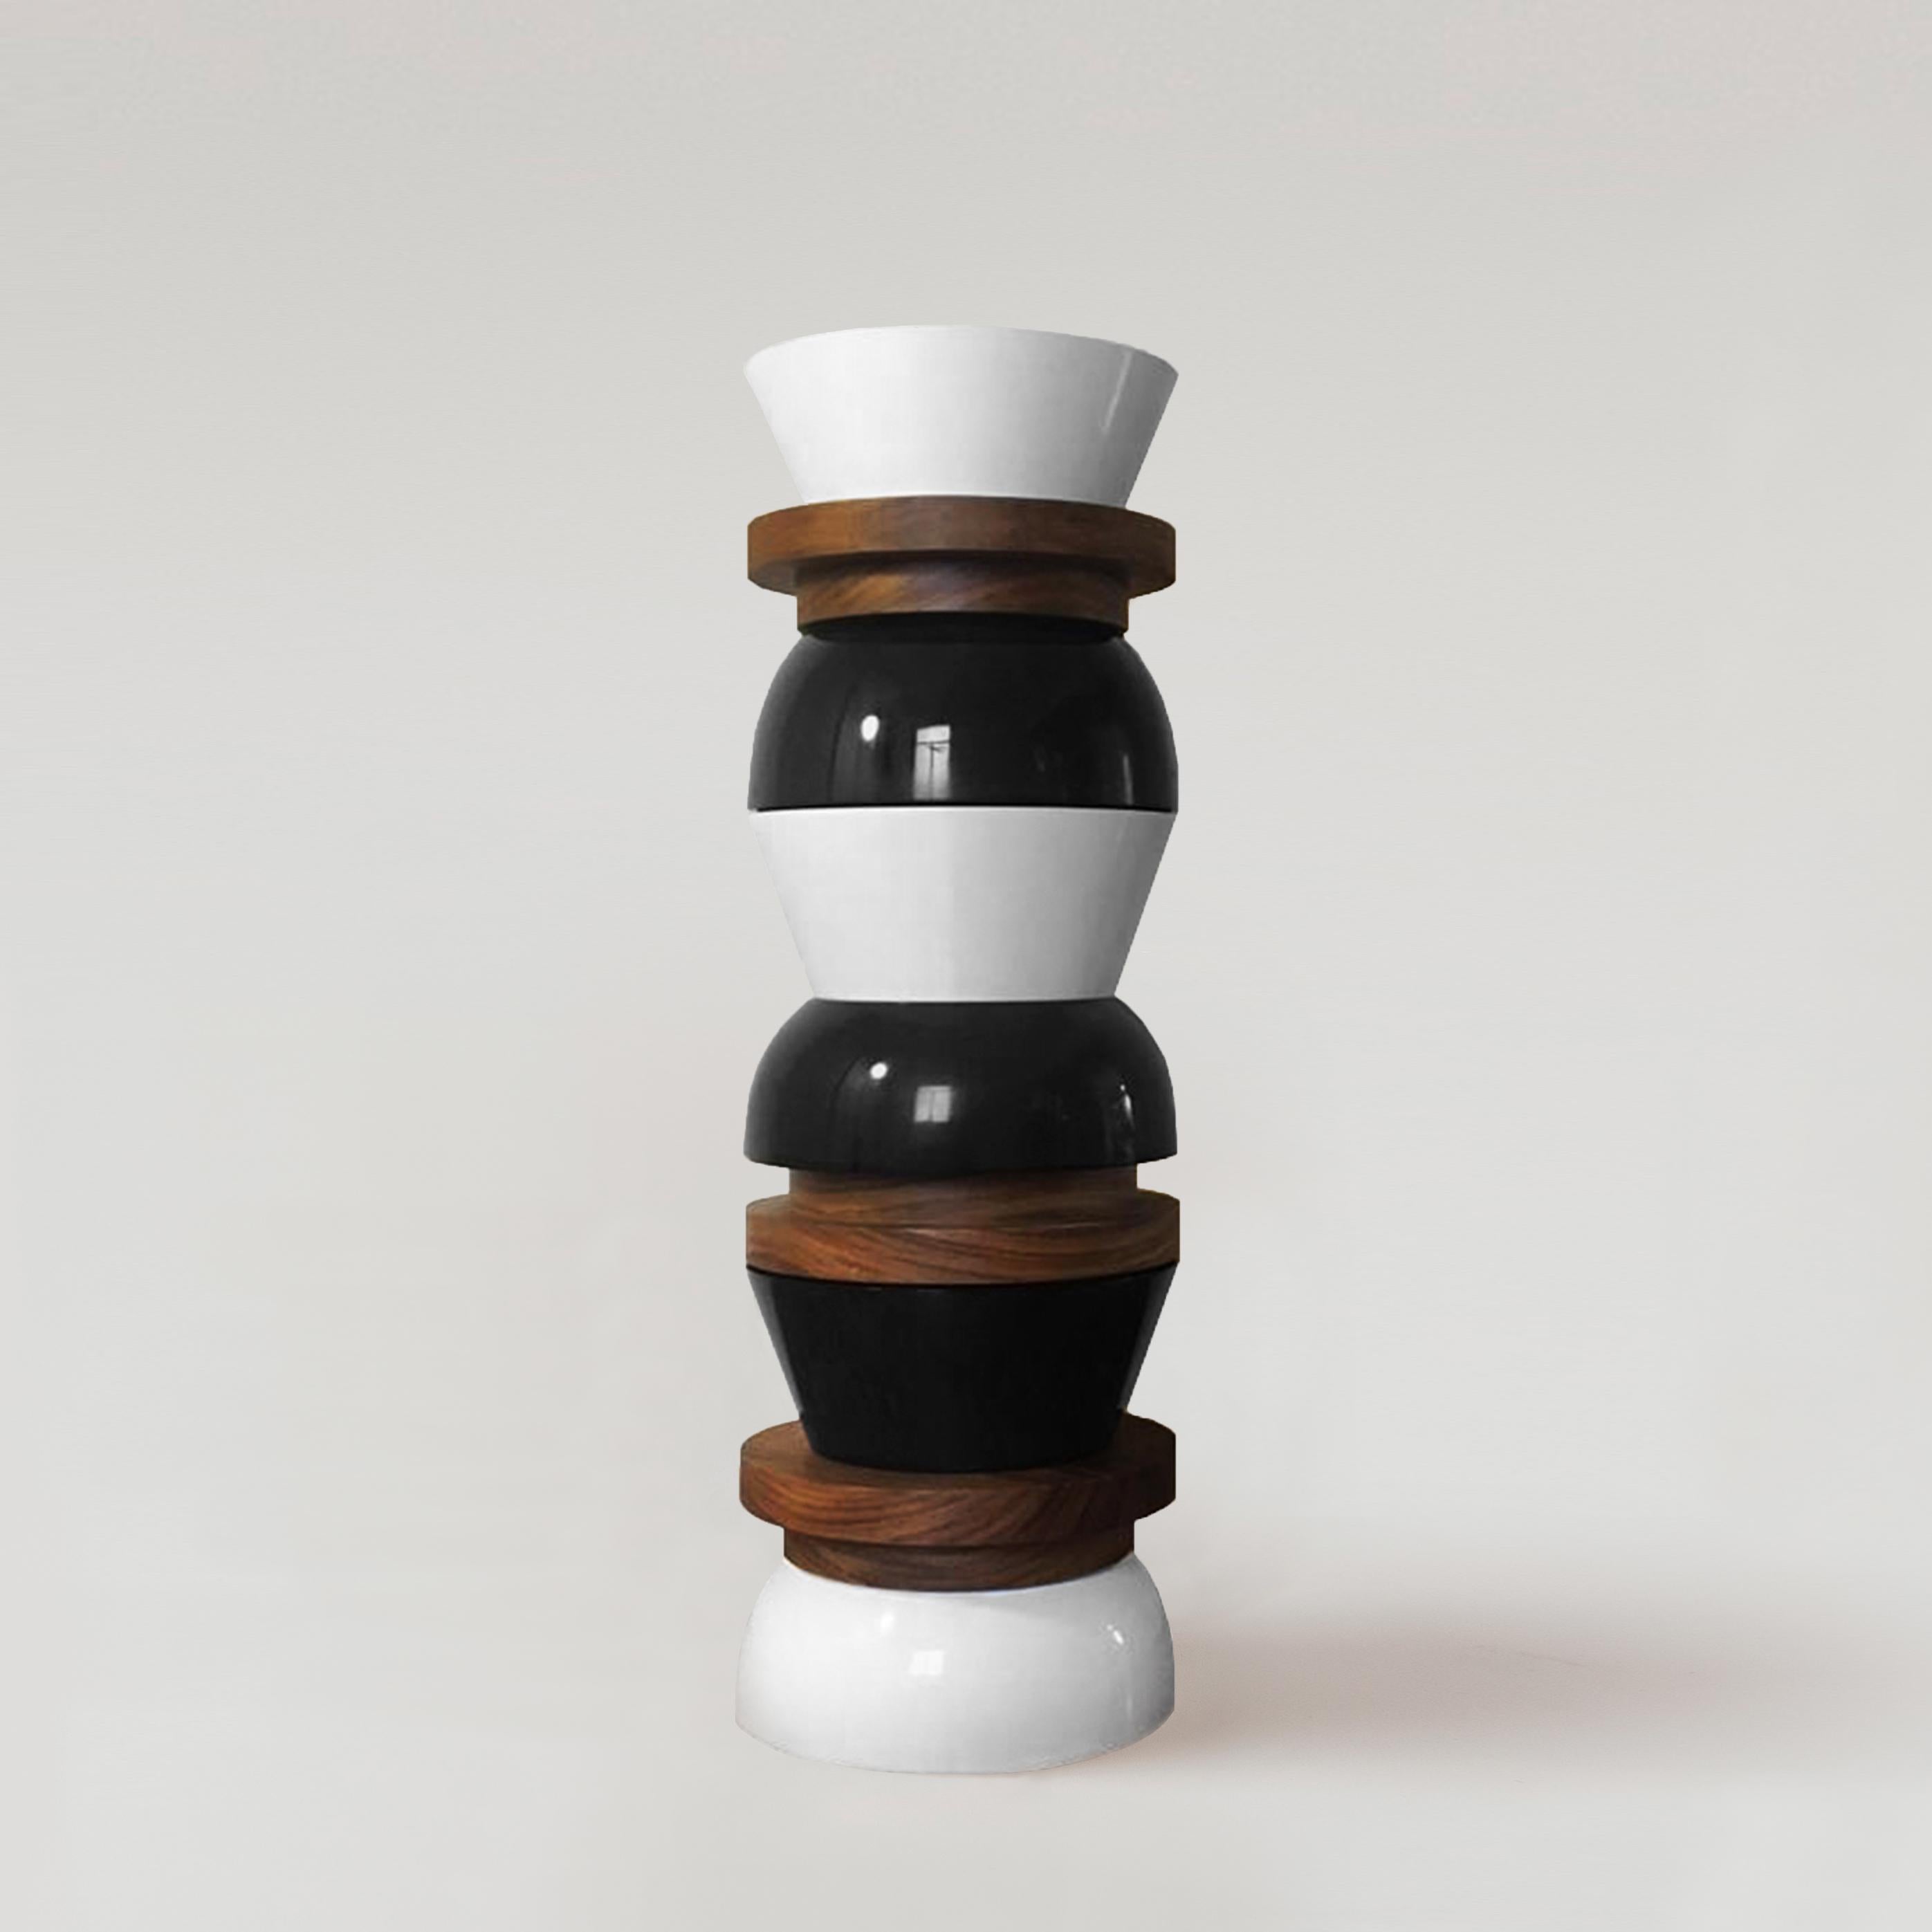 Utility Sculpture:
1 TAO, functions as a stool/table 
Create your own TOTEM by stacking 3 or 4 TAOS!
Material: Radiata and Parota wood, high gloss resin finish (Indoors).

Rebeca Cors (México, 1988) works as an independent artist under the name